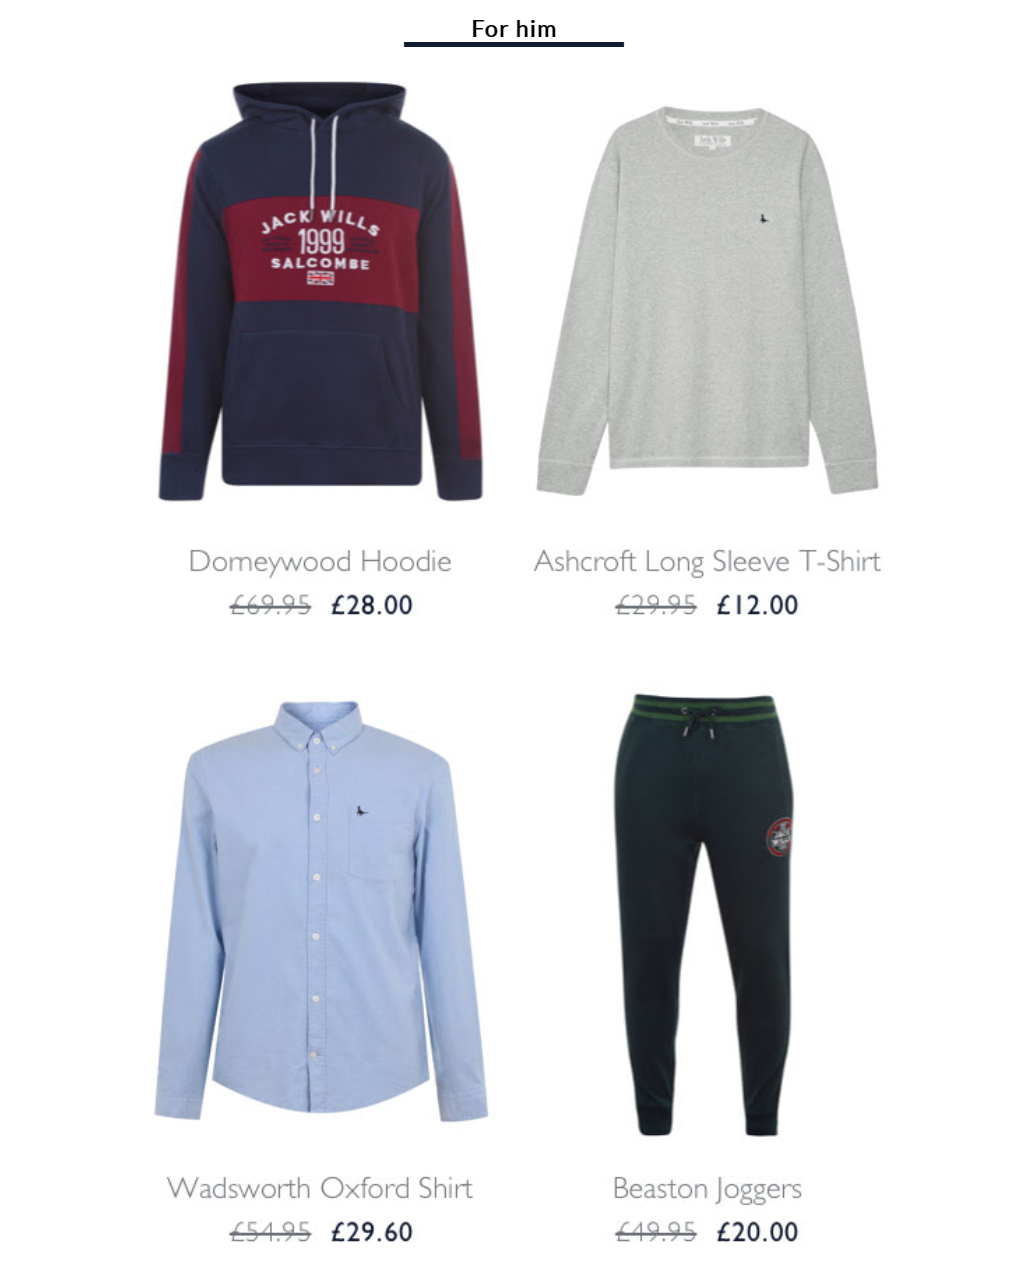 Jack Wills - Hello Outlet - 20% OFF everything